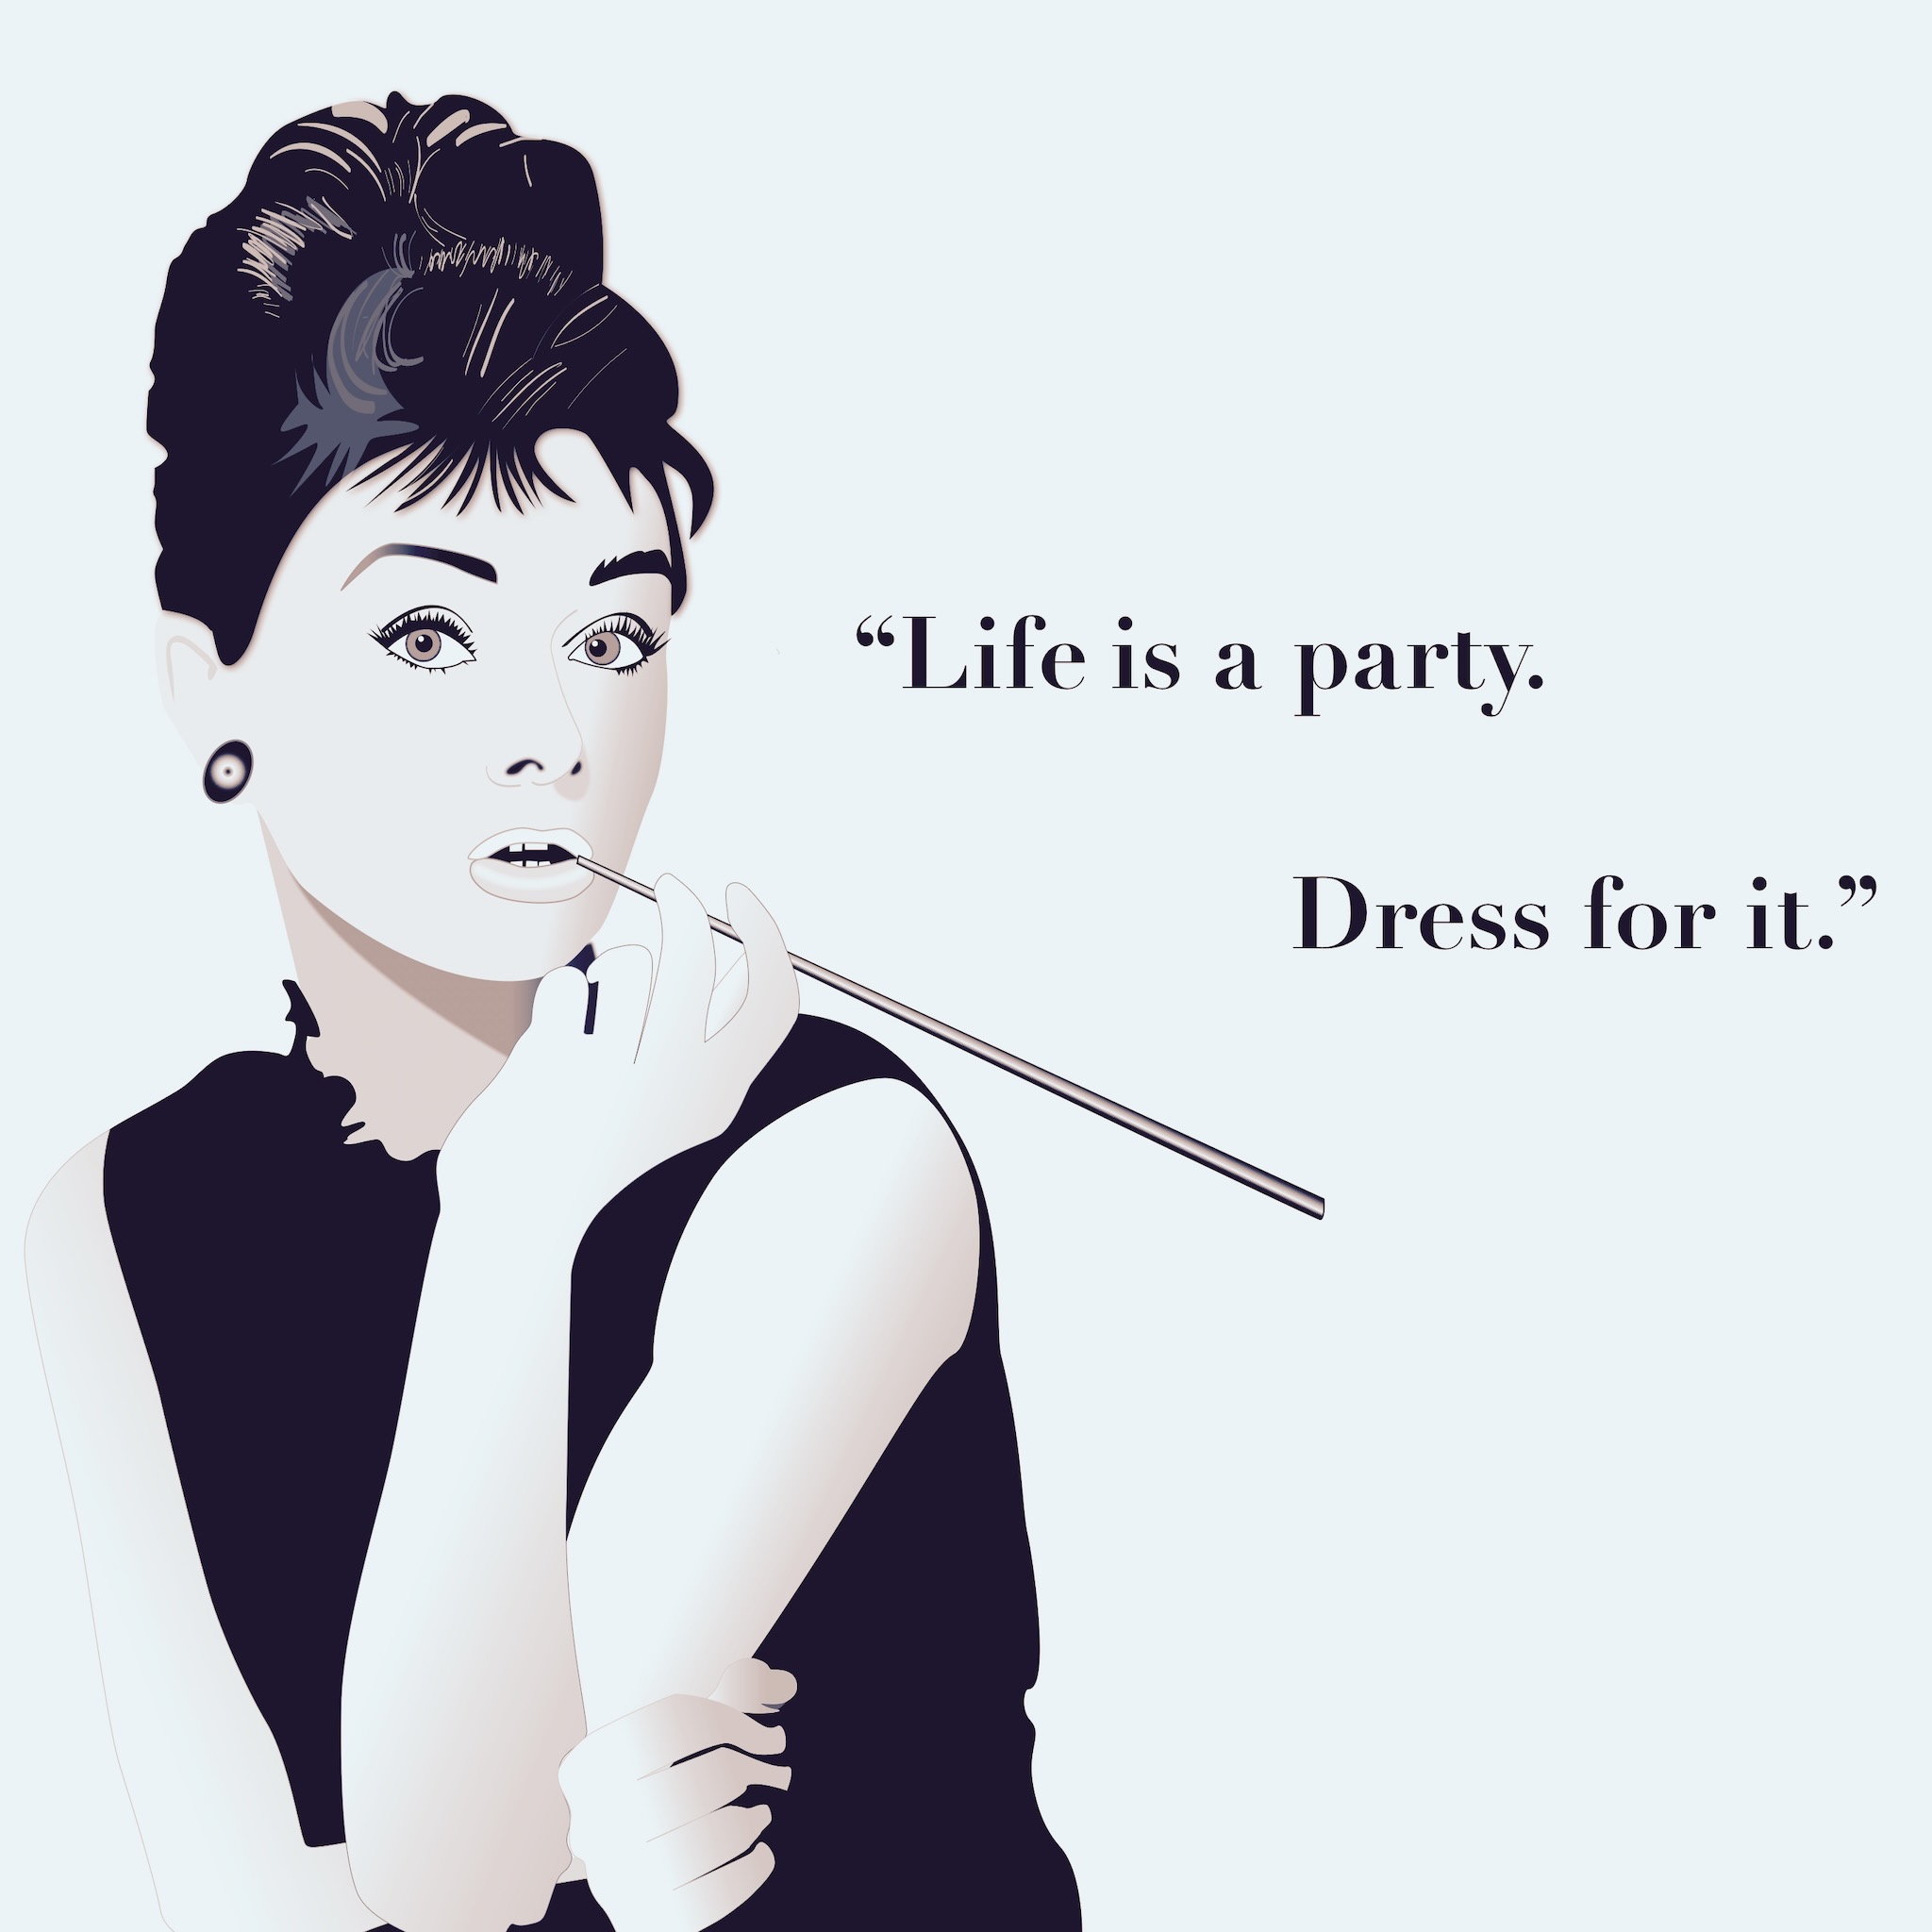 Life is party. Dress for it. - Audrey Hepburn